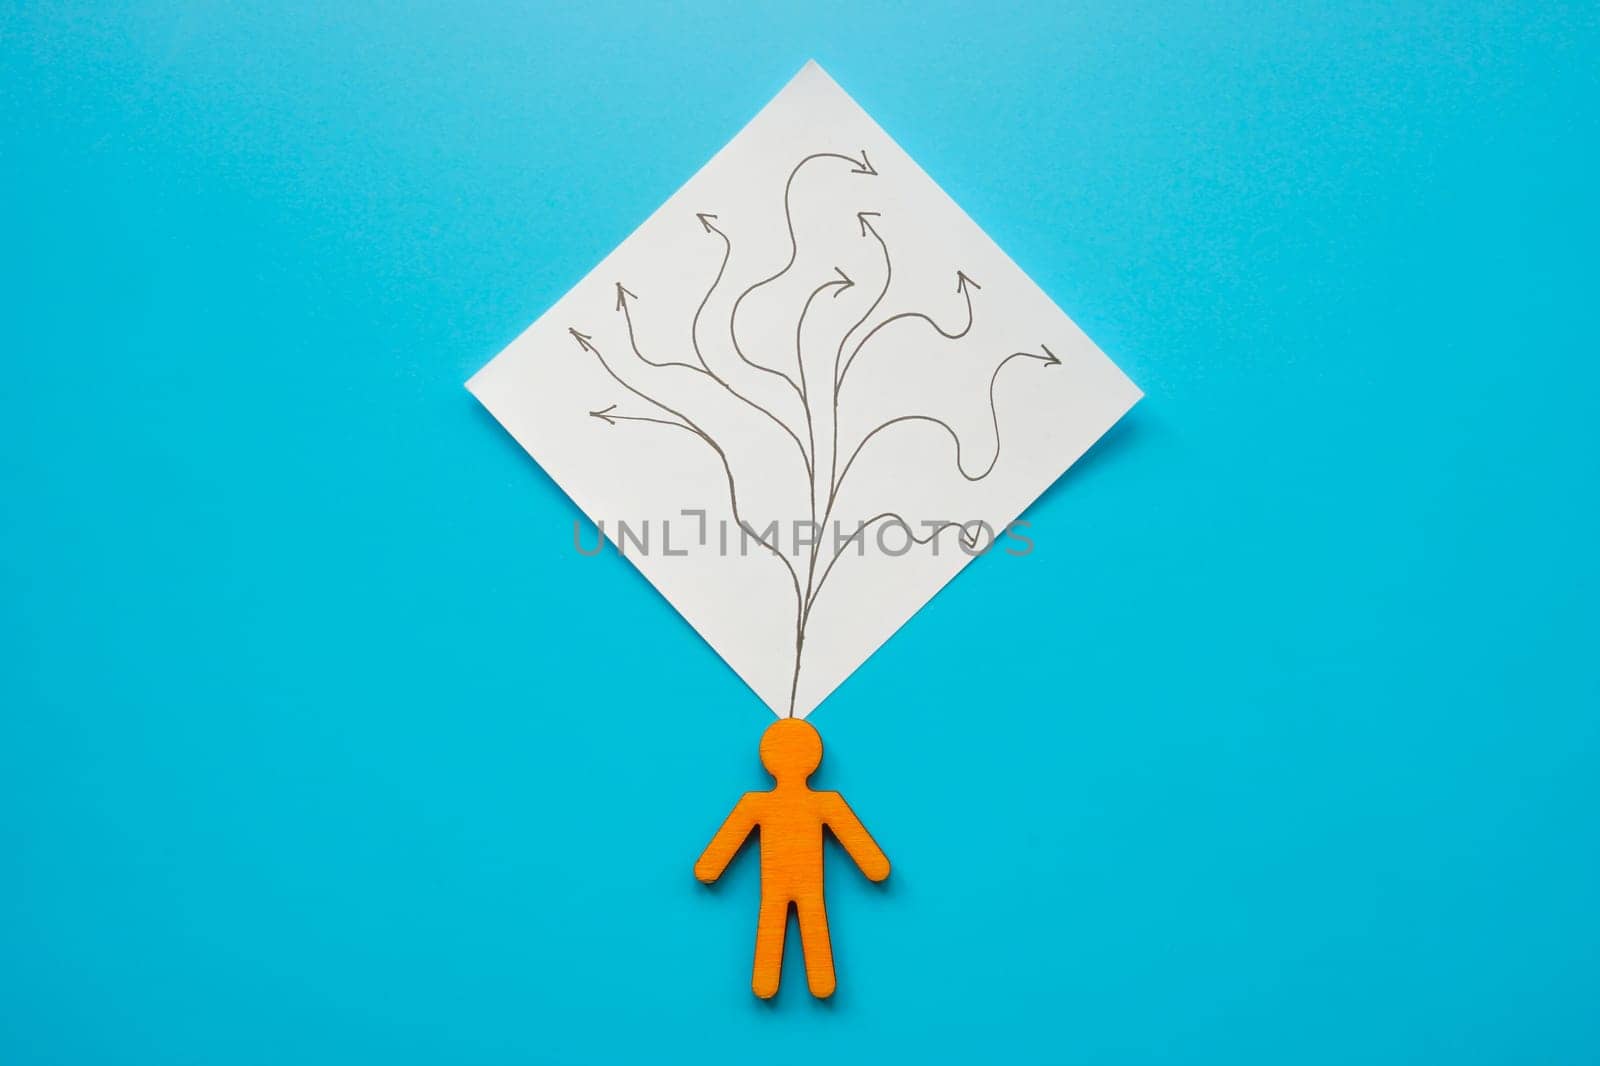 A figurine with drawn arrows as a symbol of thinking, doubt, and choosing the right option. by designer491